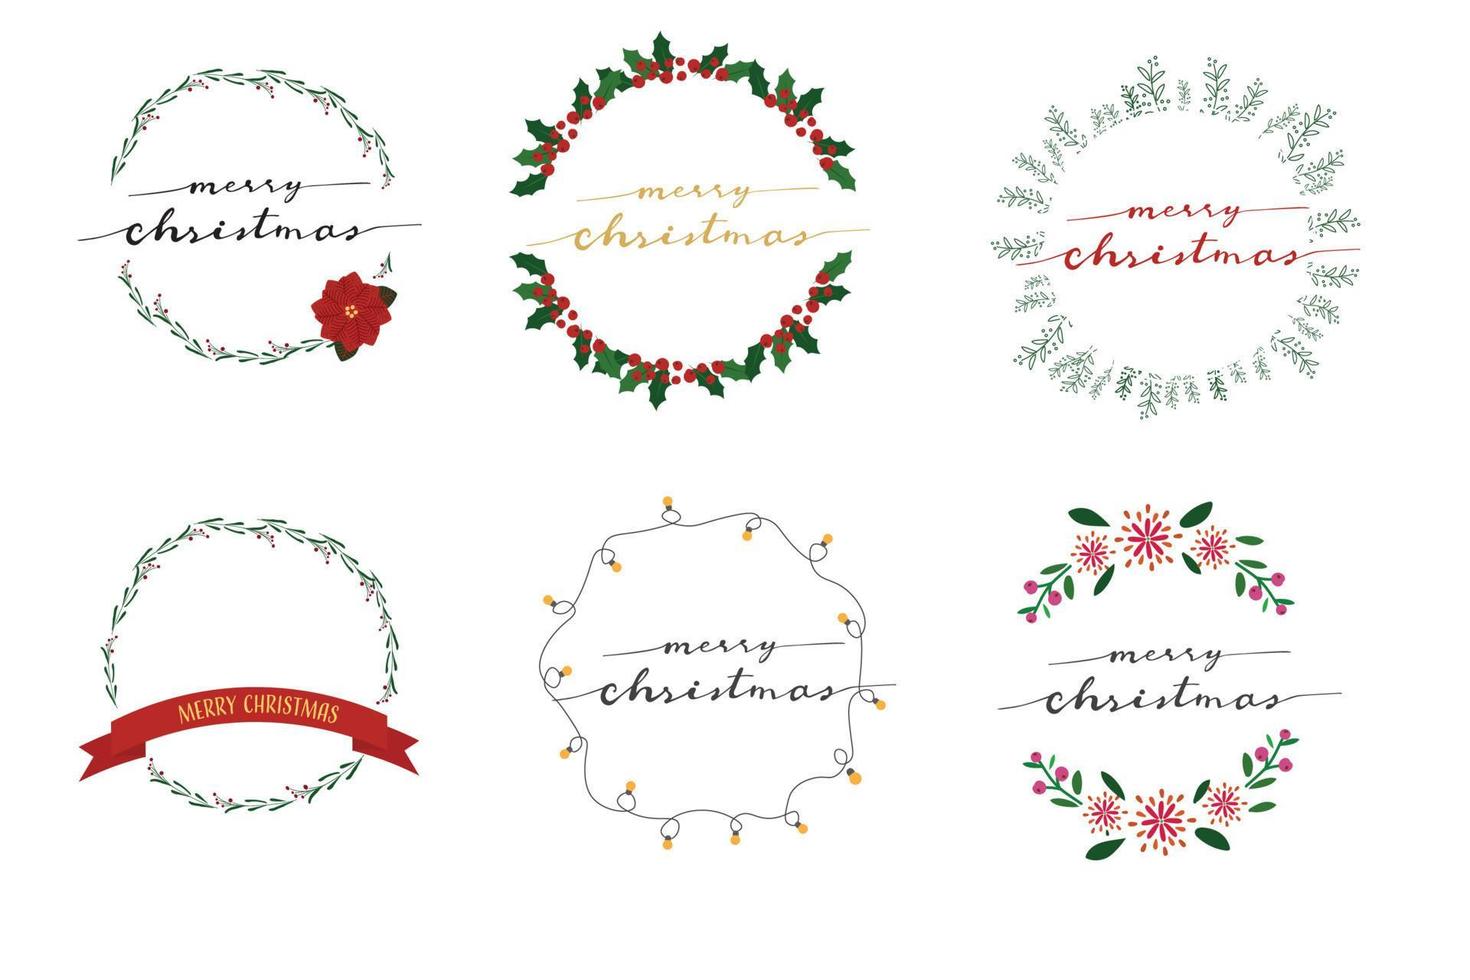 Christmas wreath frame with merry christmas calligraphy collection eps10 vector illustration